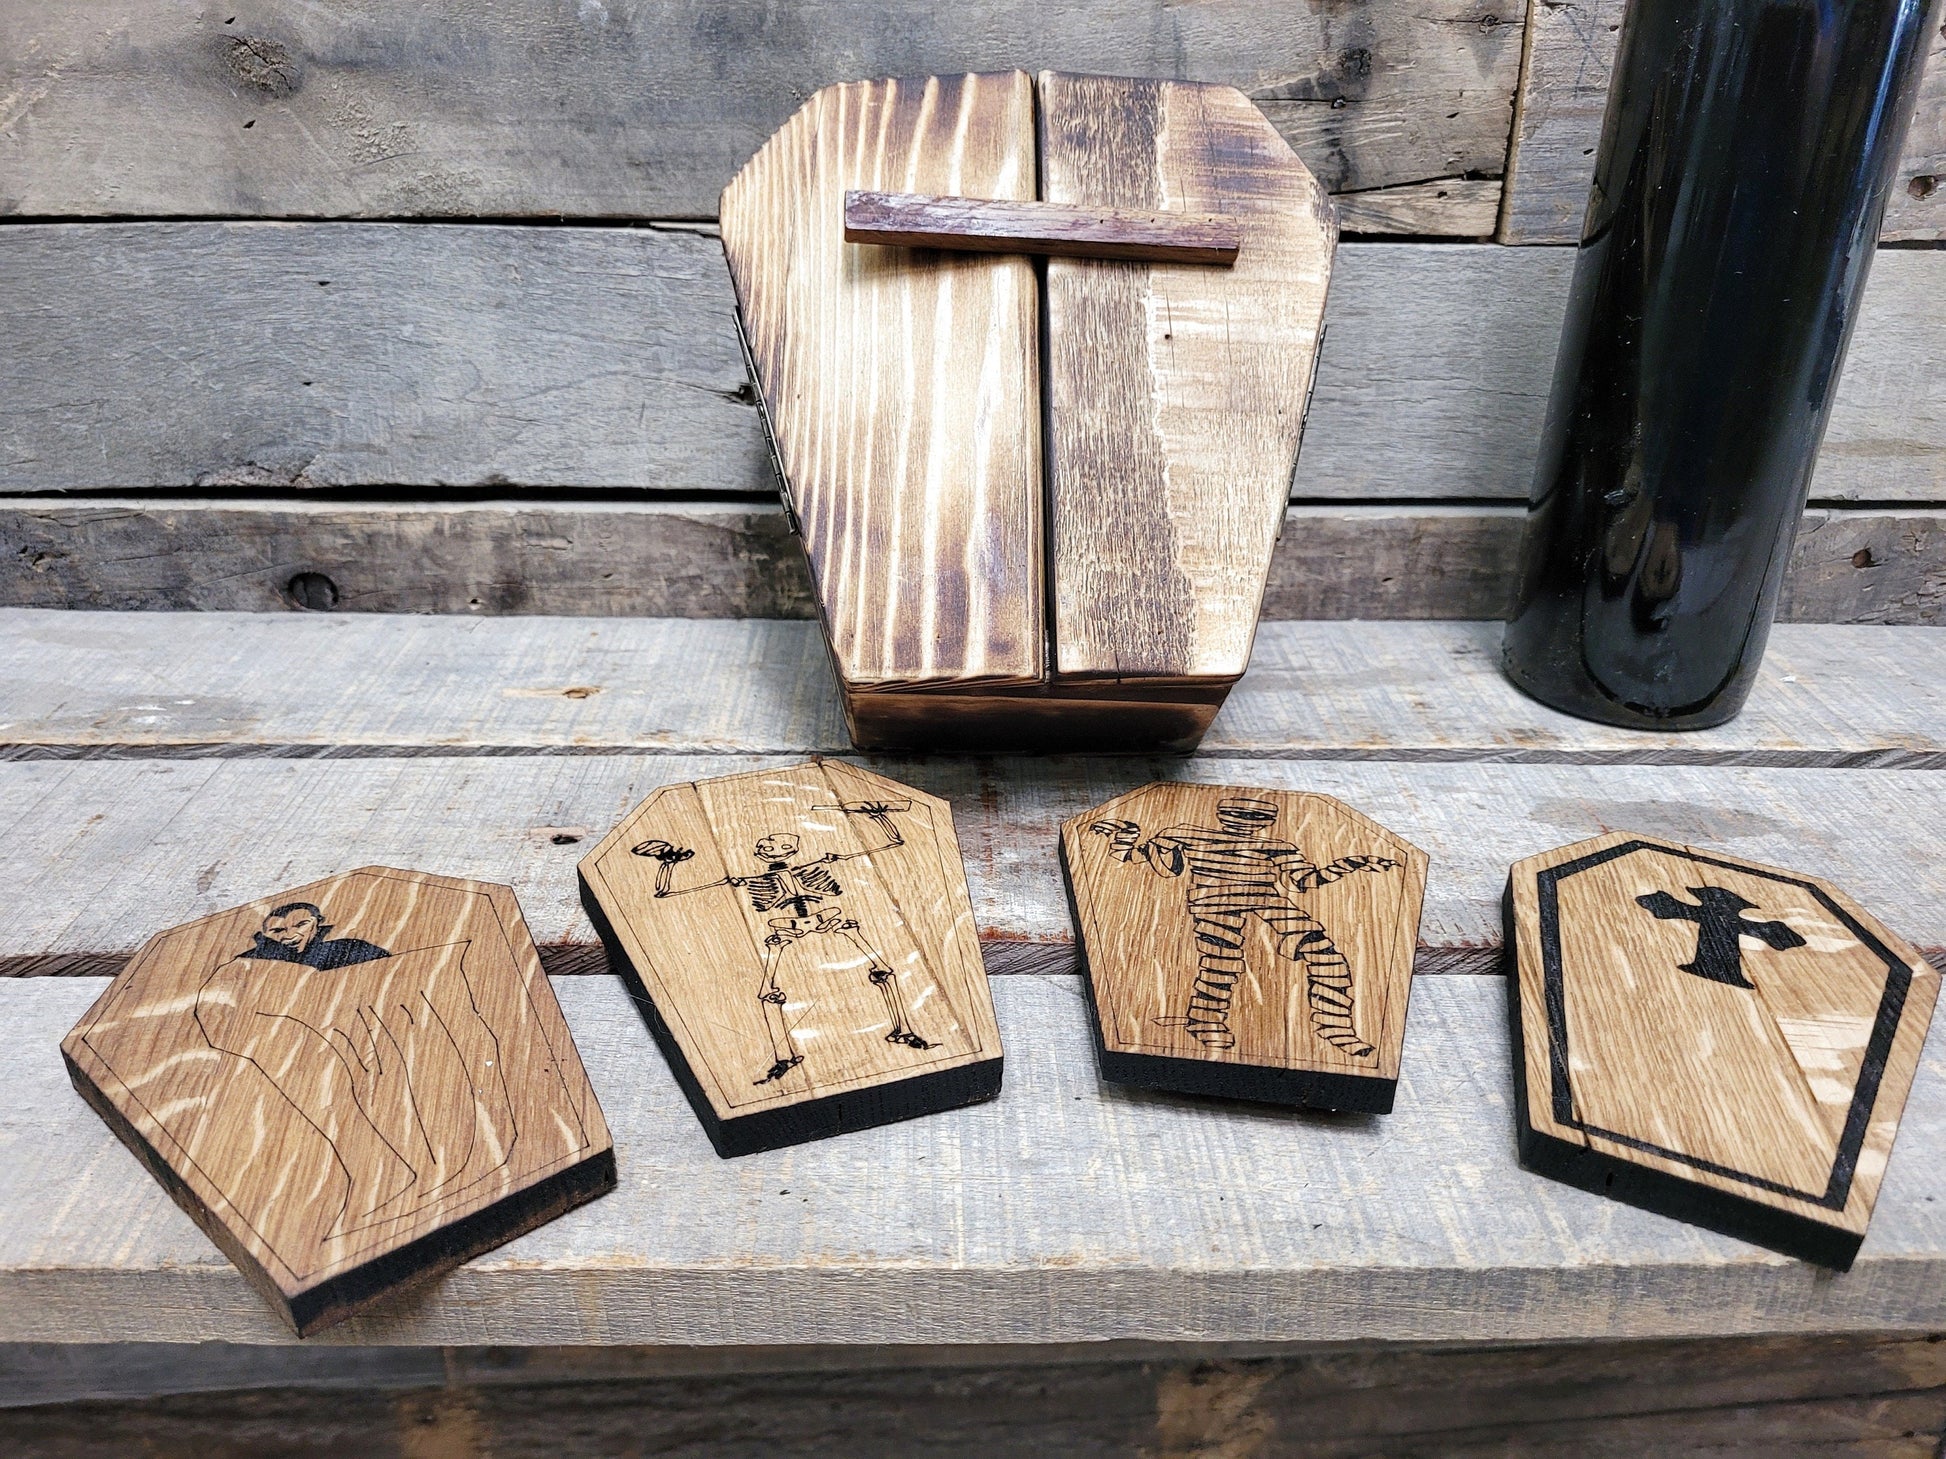 Halloween Wine Barrel Coasters - Coffin - Dracula - Mummy - Skeleton - Made from retired wine barrels - ROJO - 100% Recycled!